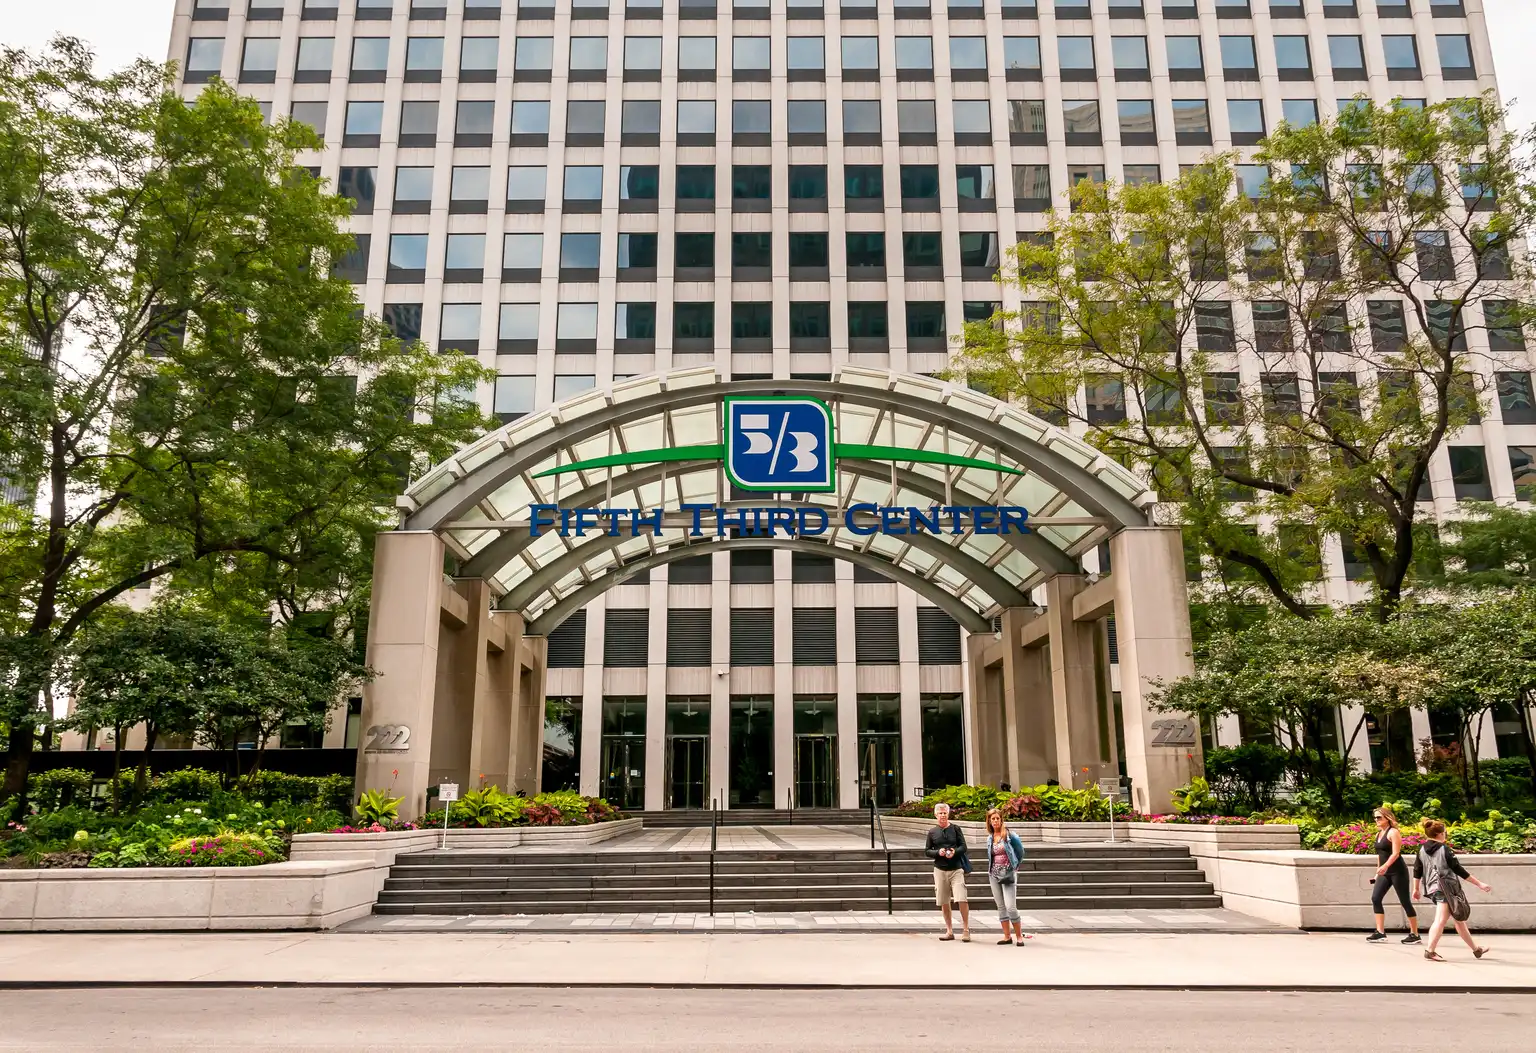 Fifth Third Bancorp Stock: Expensive For The Right Reasons - Seeking Alpha